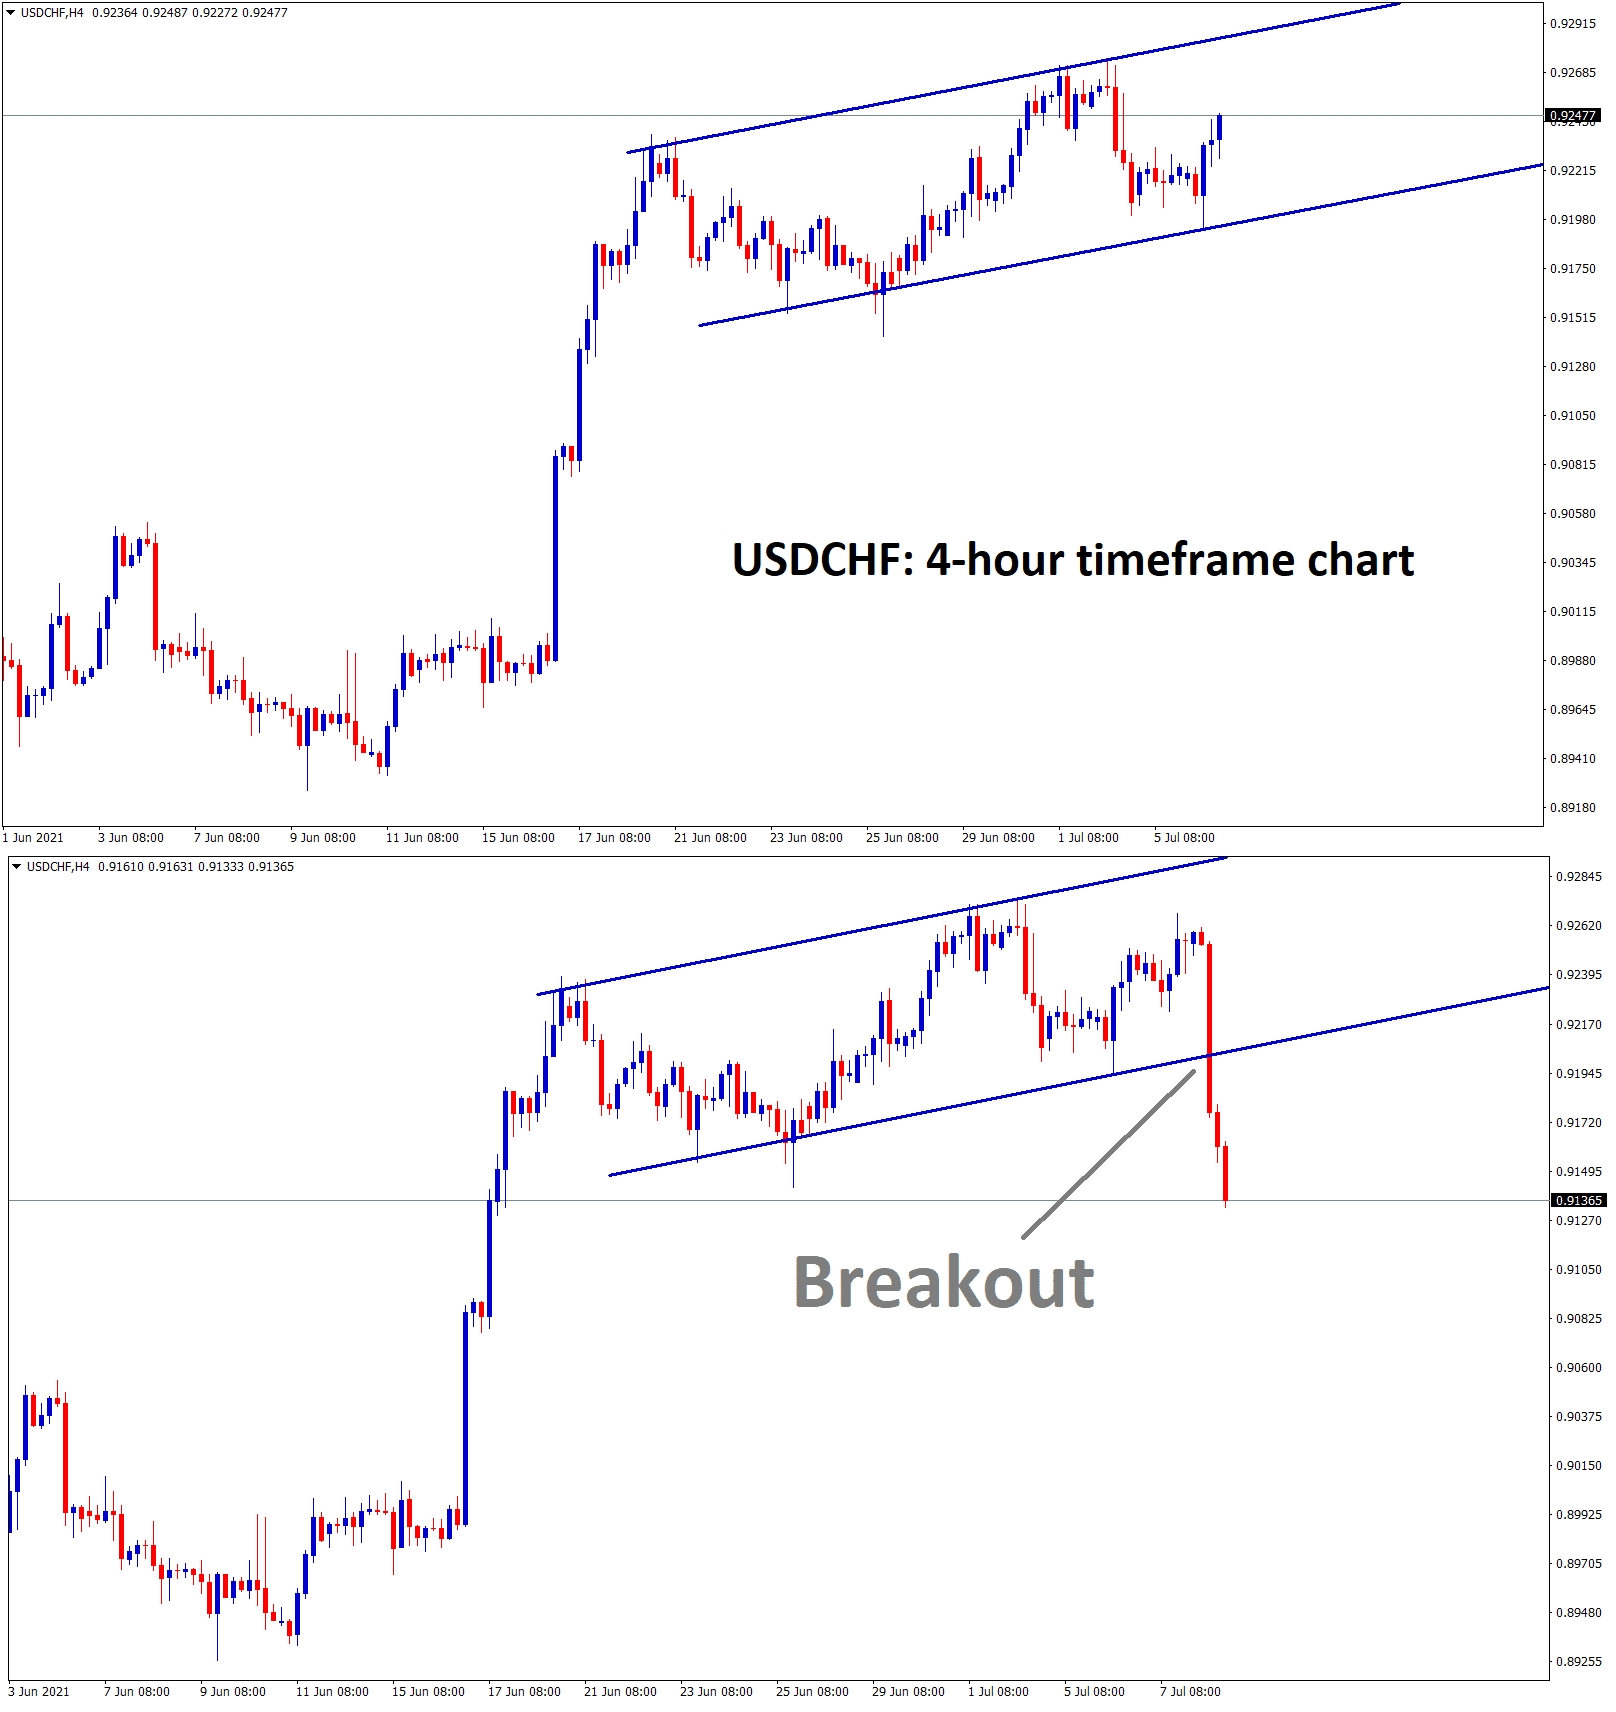 USDCHF is also moving in an uptrend channel line 1